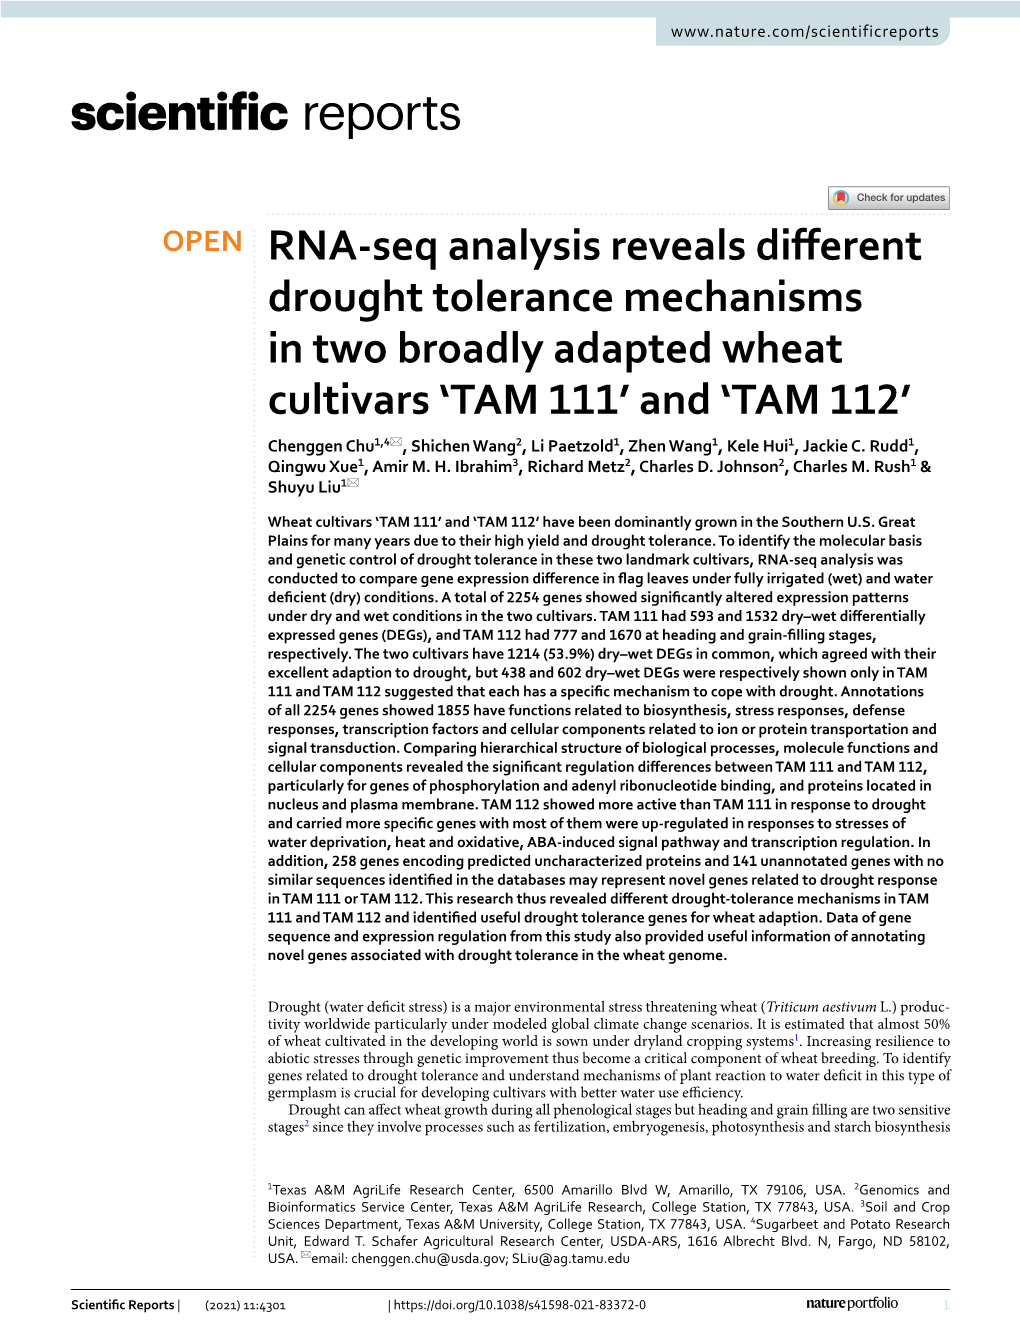 RNA-Seq Analysis Reveals Different Drought Tolerance Mechanisms in Two Broadly Adapted Wheat Cultivars